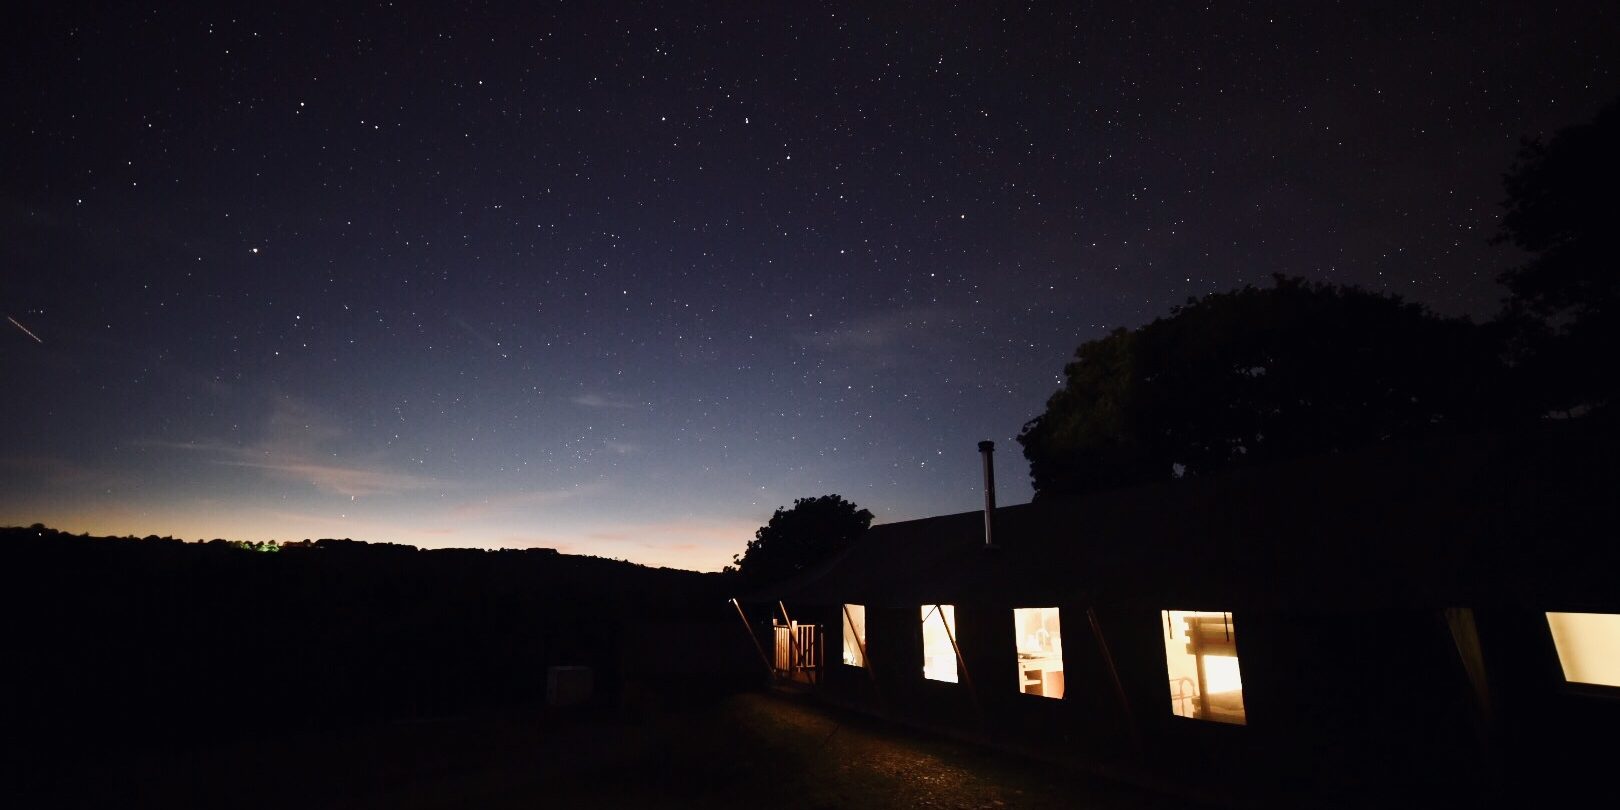 A night time image of the valley, a tent to the right and a shooting star to the left of the picture